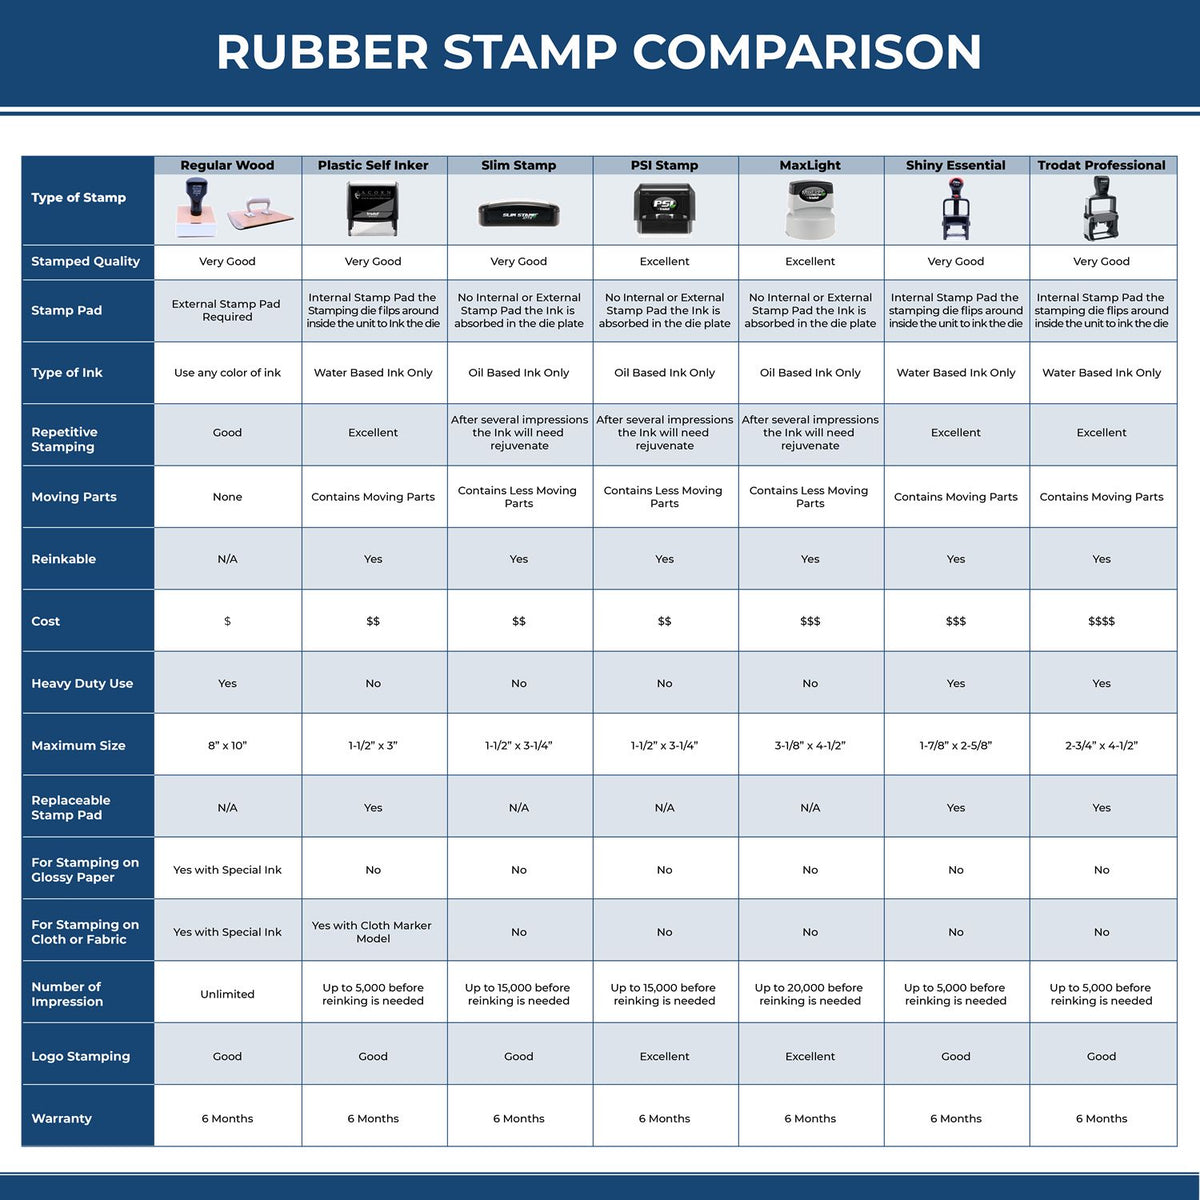 Posted Rubber Stamp 4044R Rubber Stamp Comparison